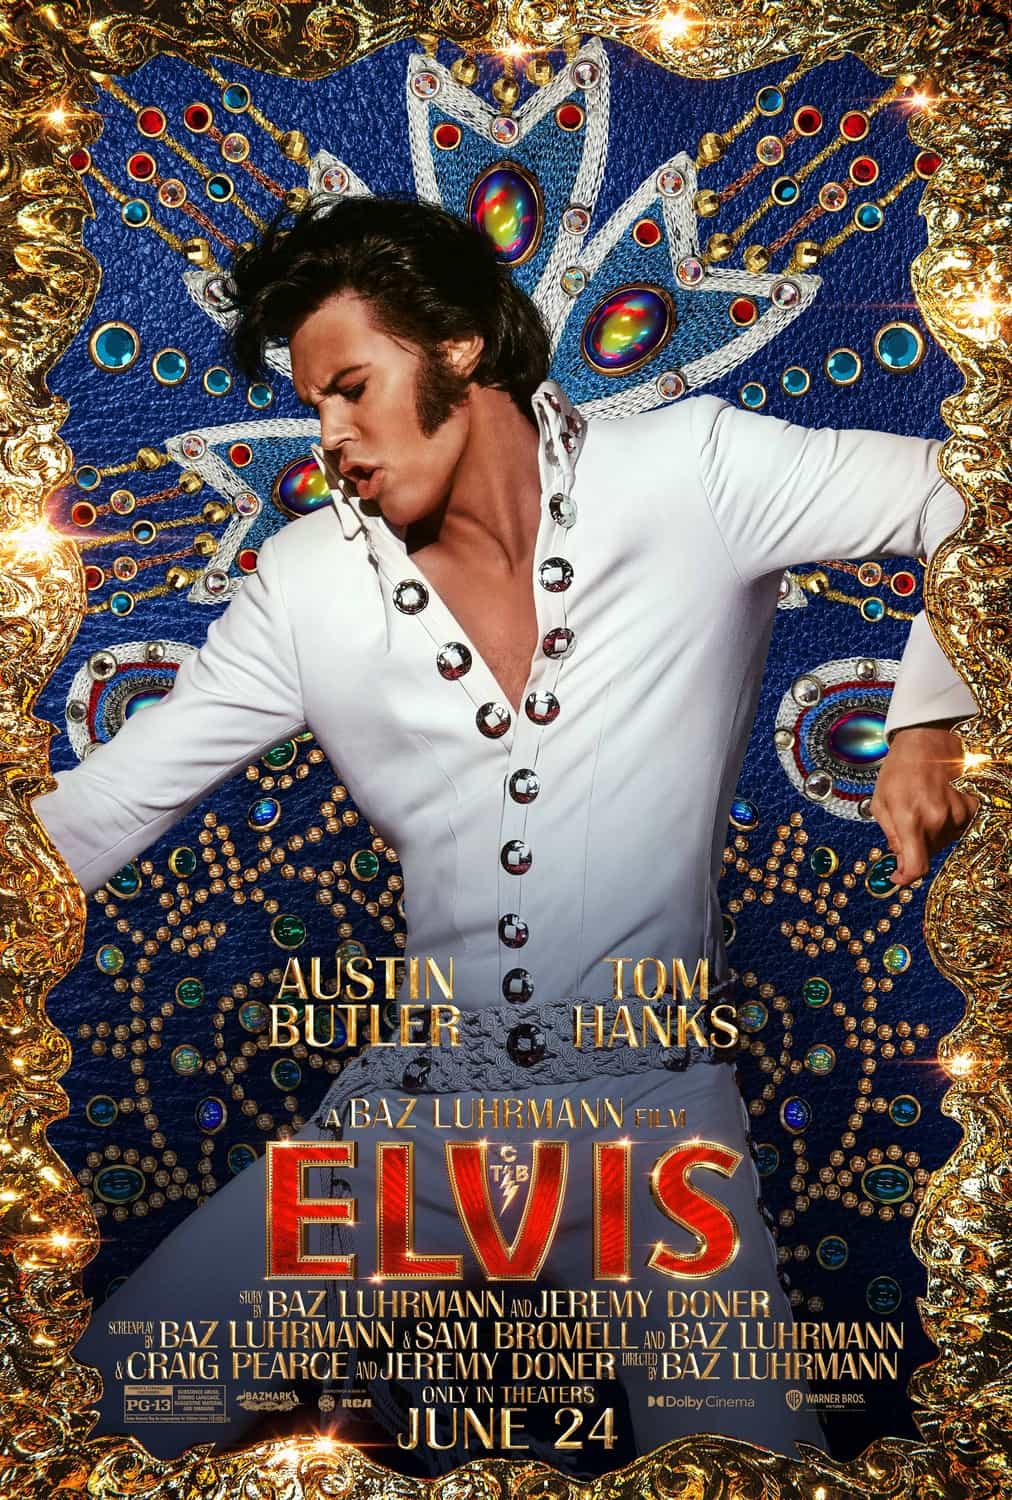 UK Box Office Figures 24th - 26th June 2022: Elvis tops the UK box office on its debut weekend with £4 Million